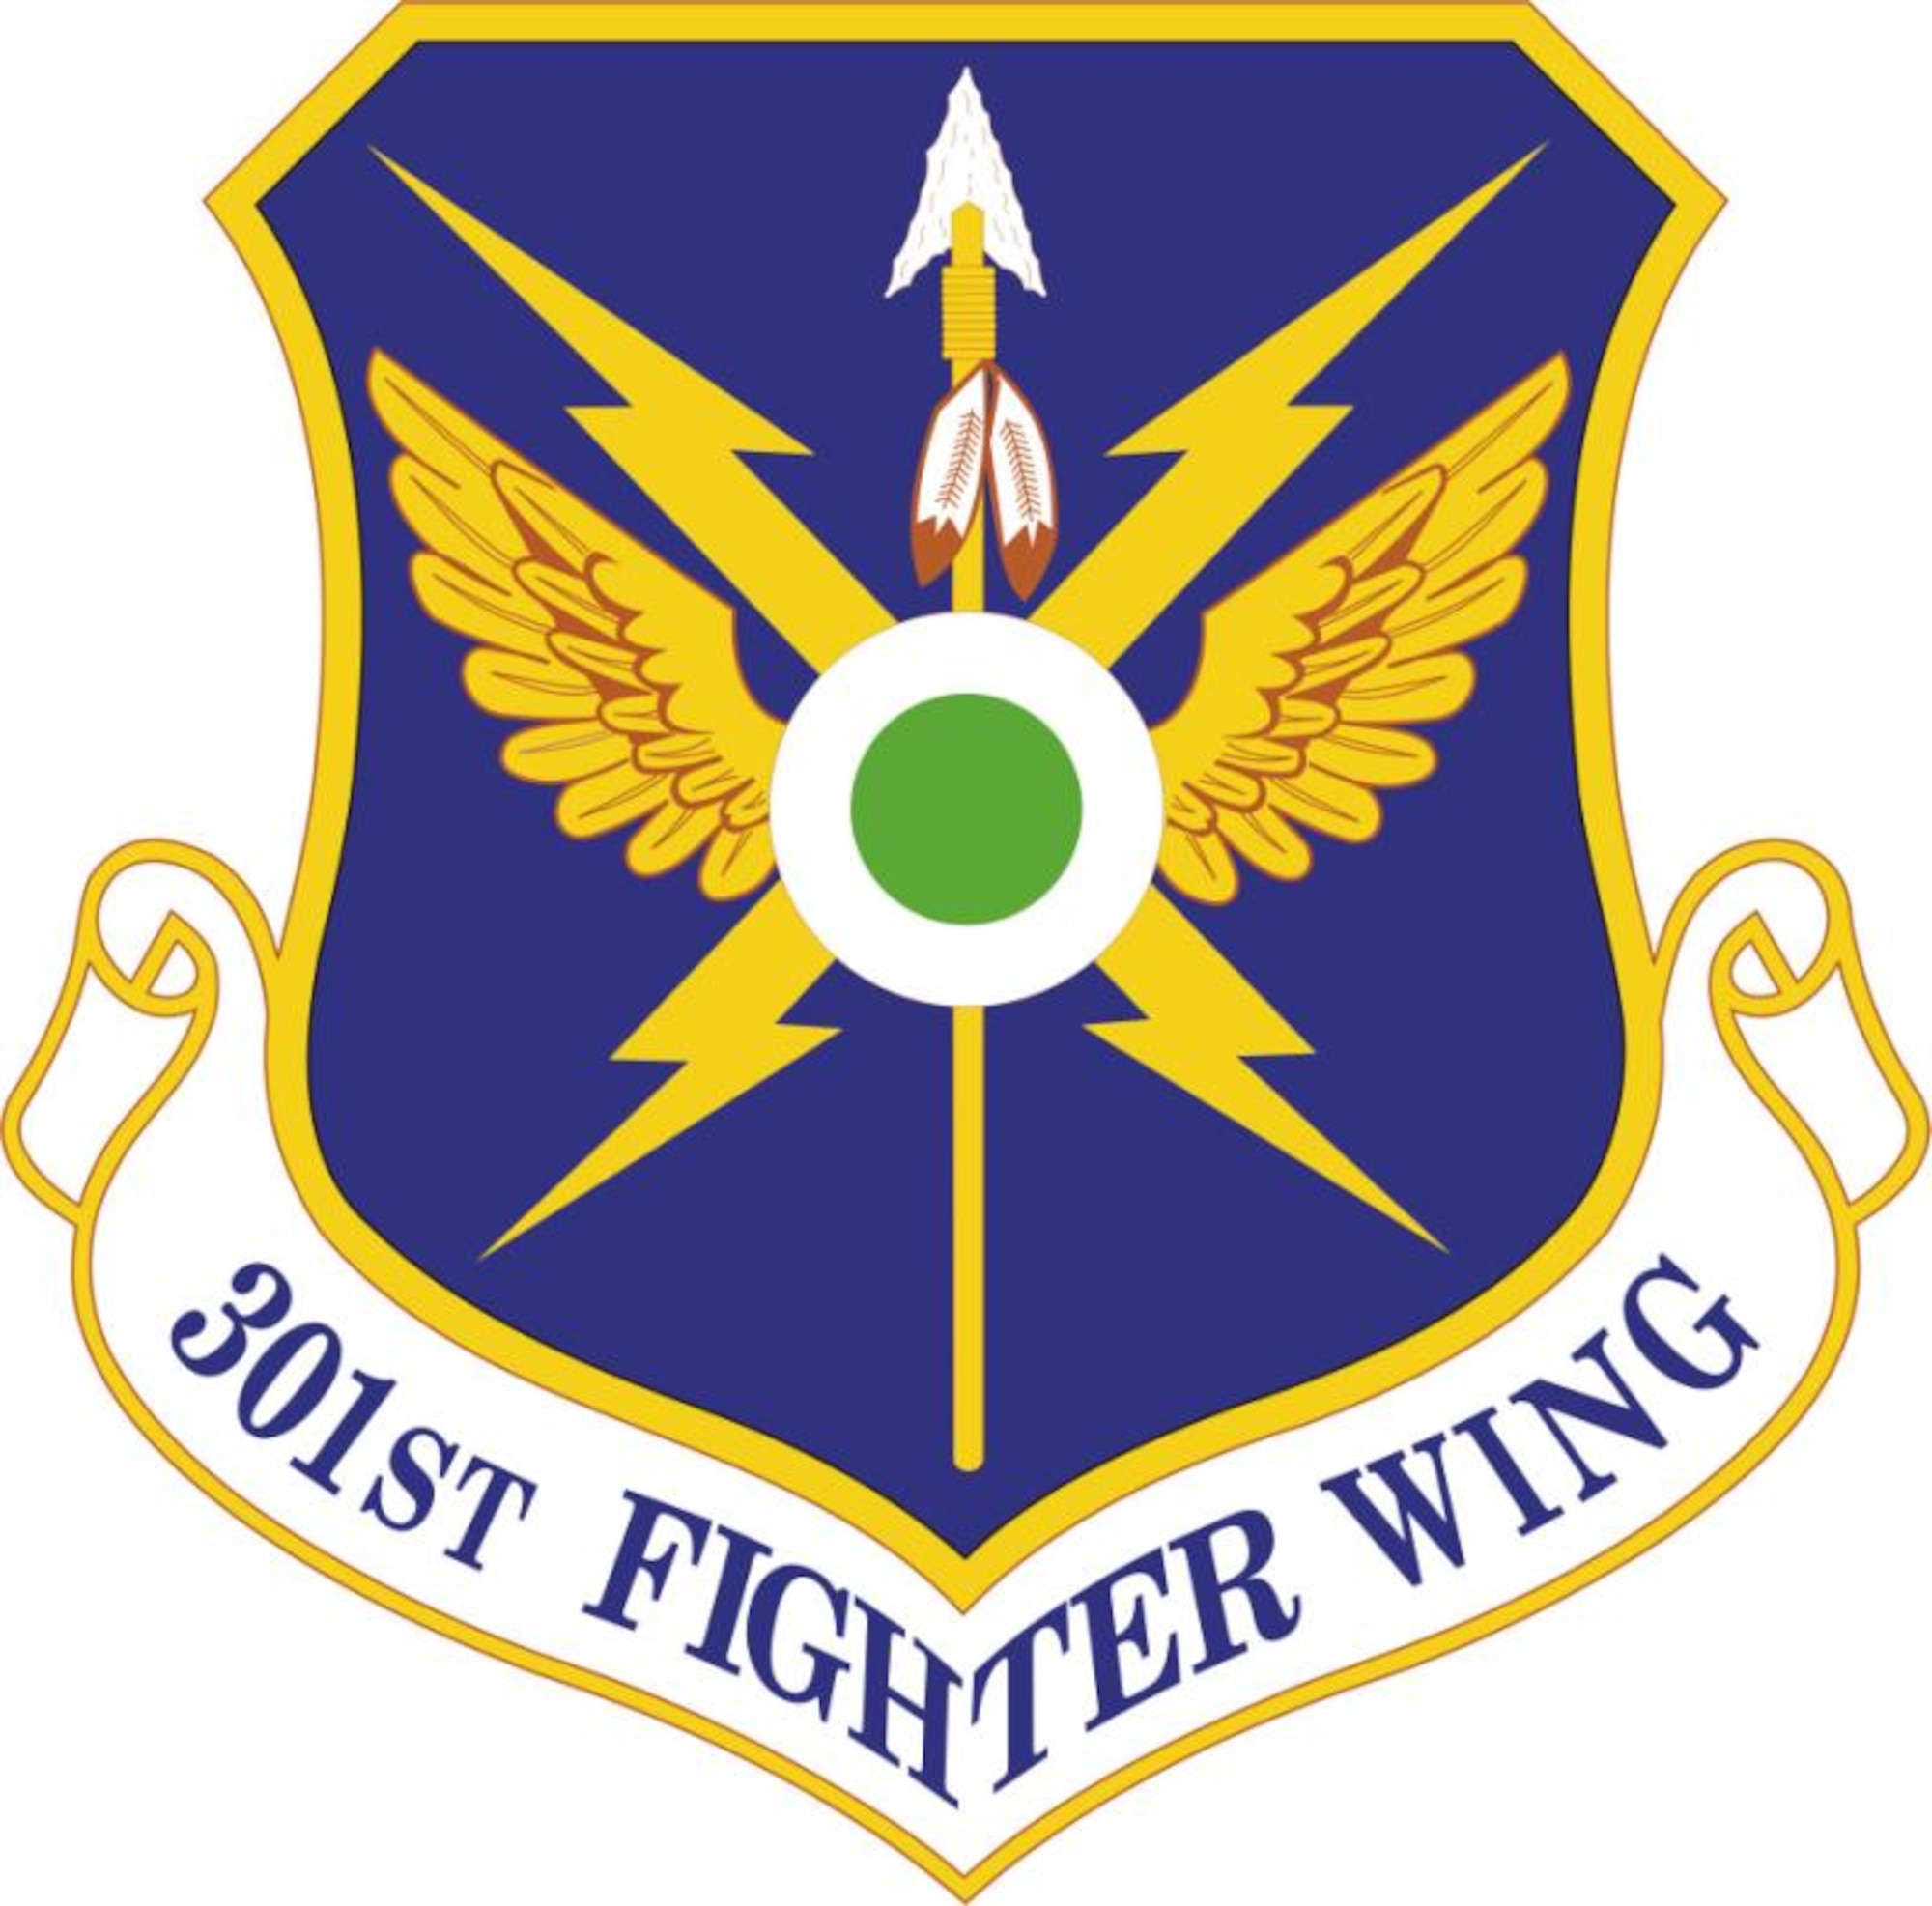 Air Force Reserve Command